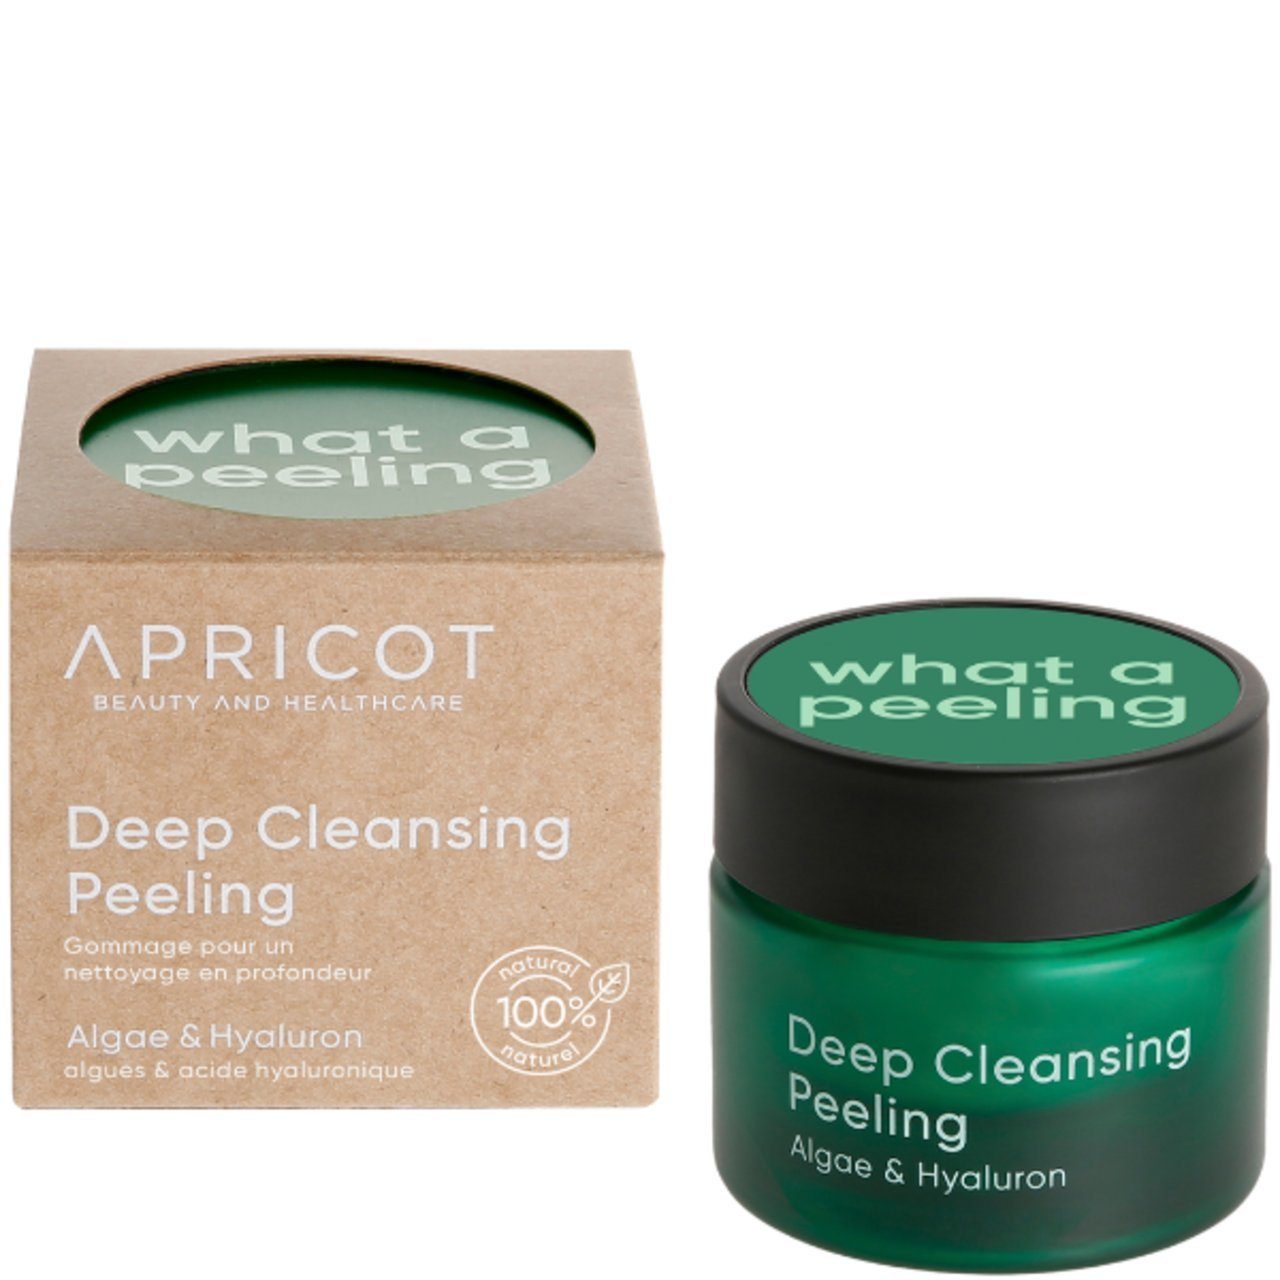 APRICOT Beauty Gesichtspeeling Deep Cleansing Peeling Coconut & Apricot "what a peeling"